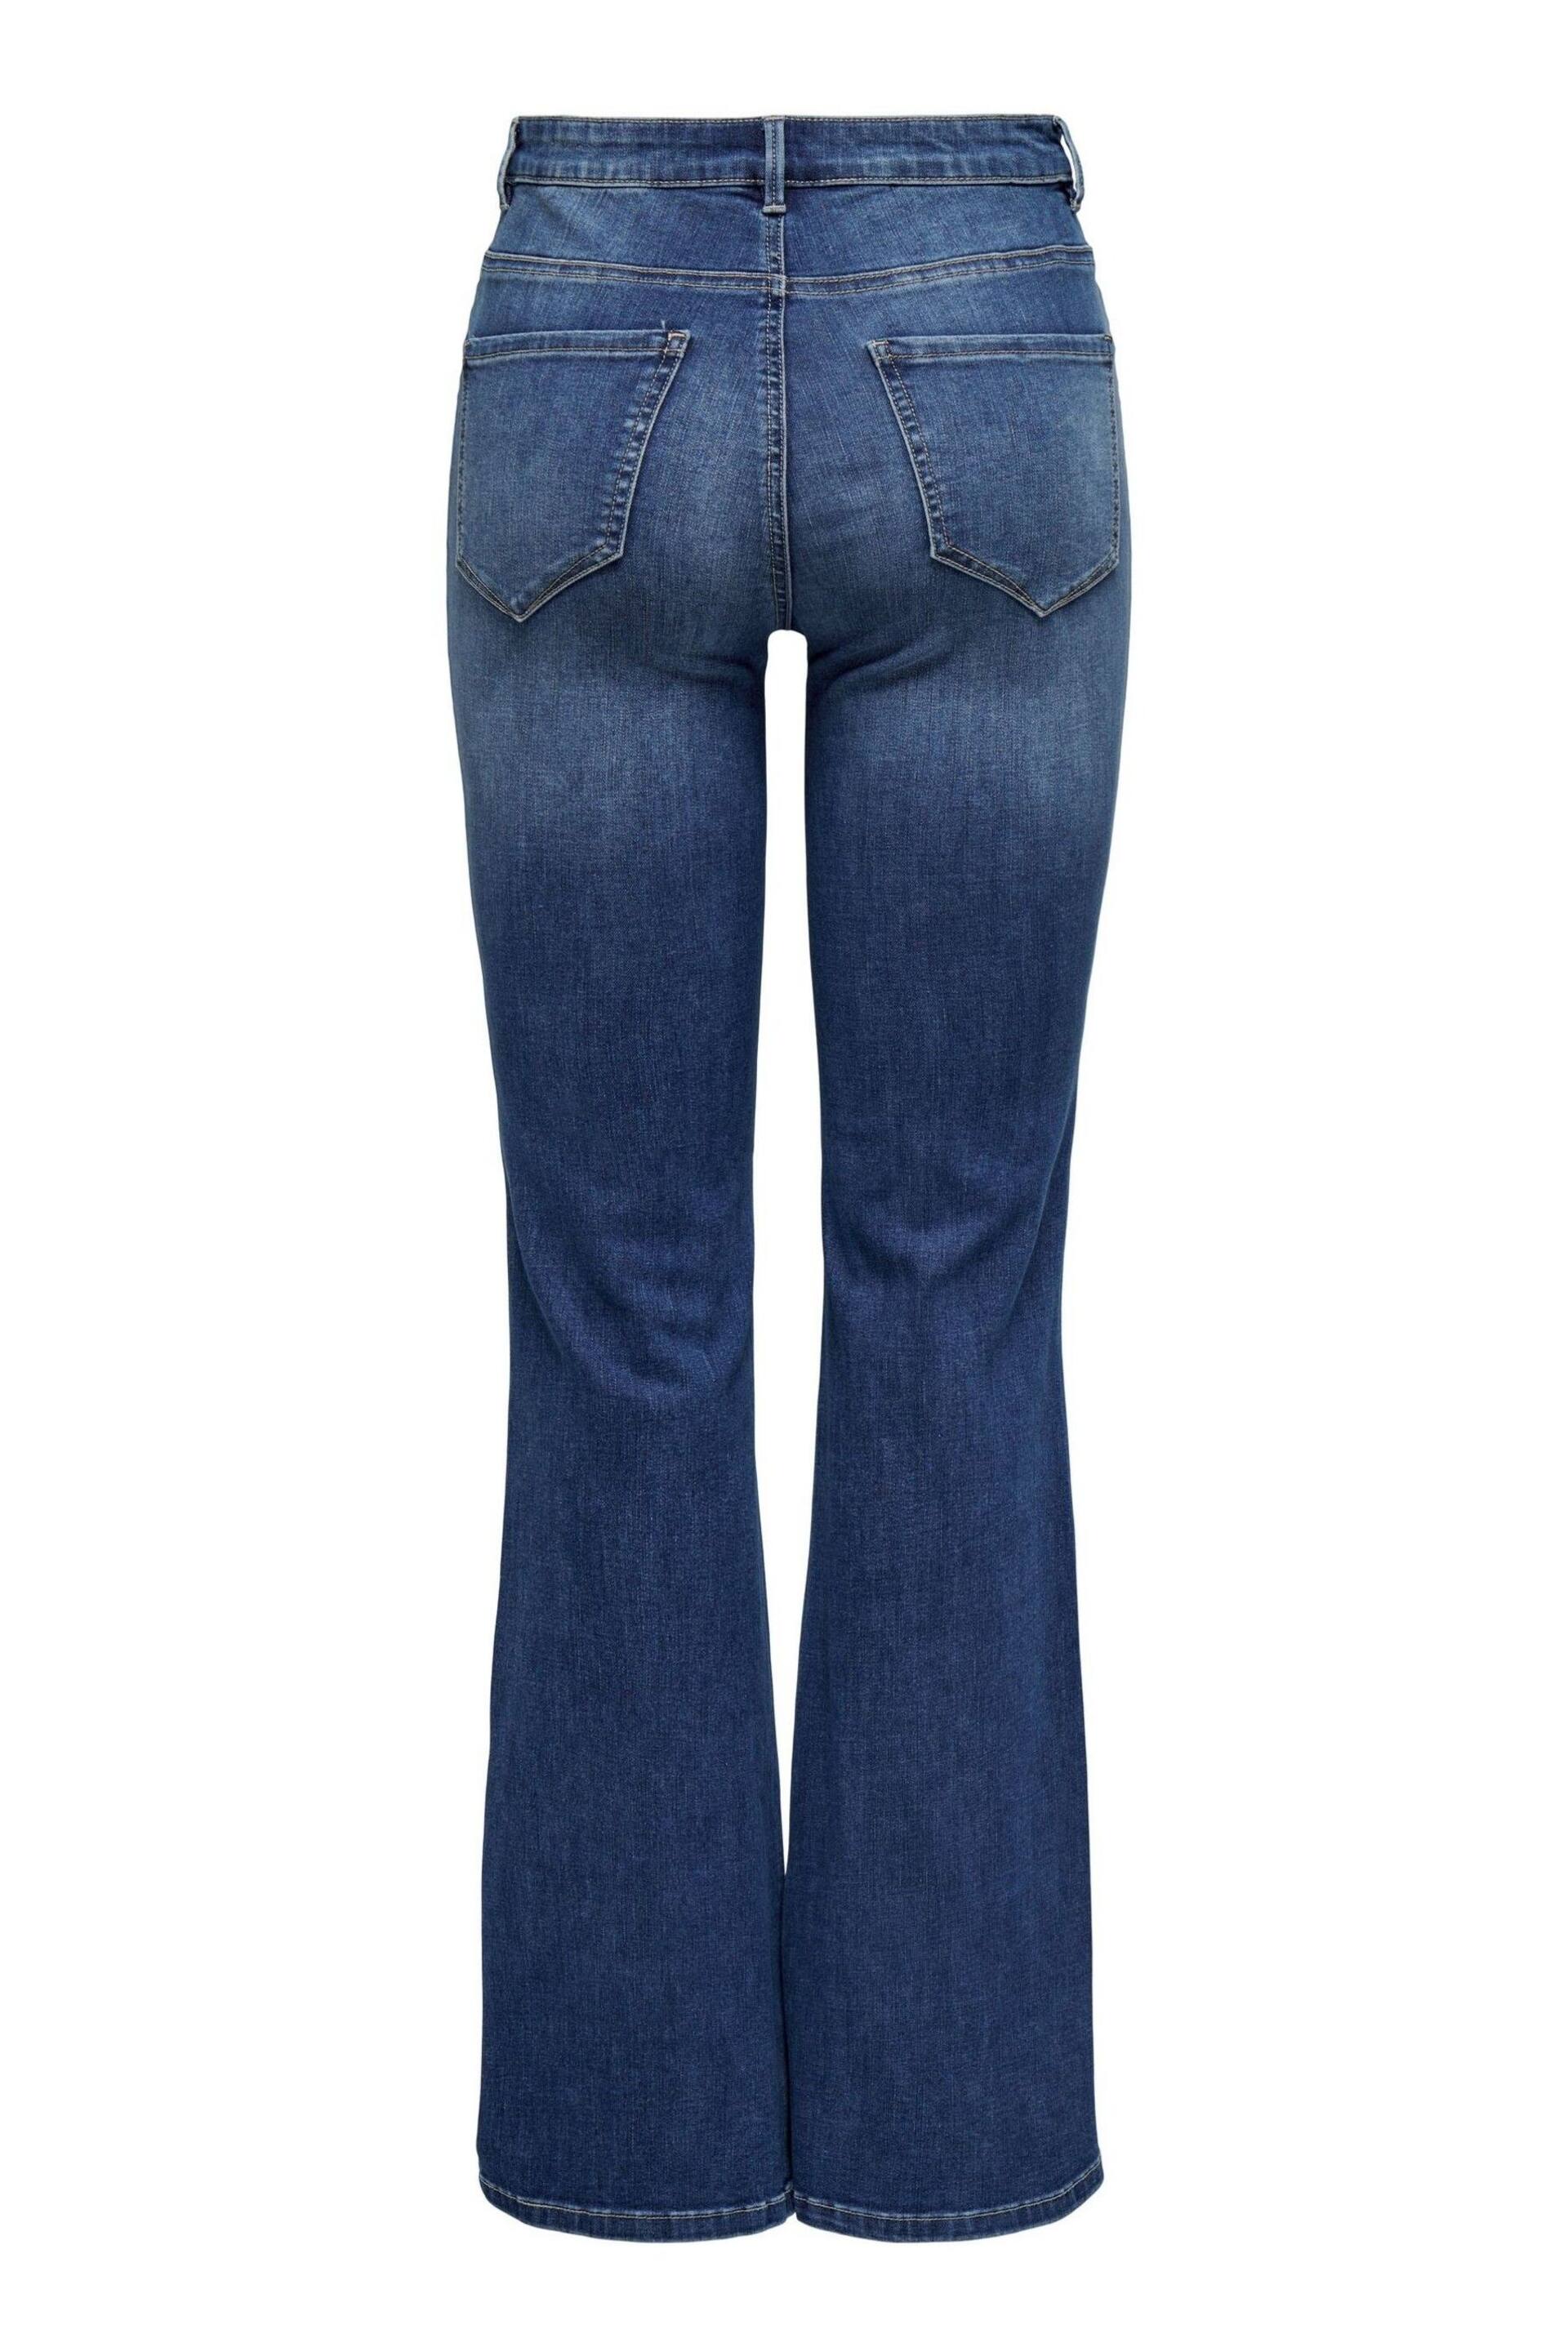 ONLY Blue High Waisted Flare Leg Rose Jeans - Image 7 of 8